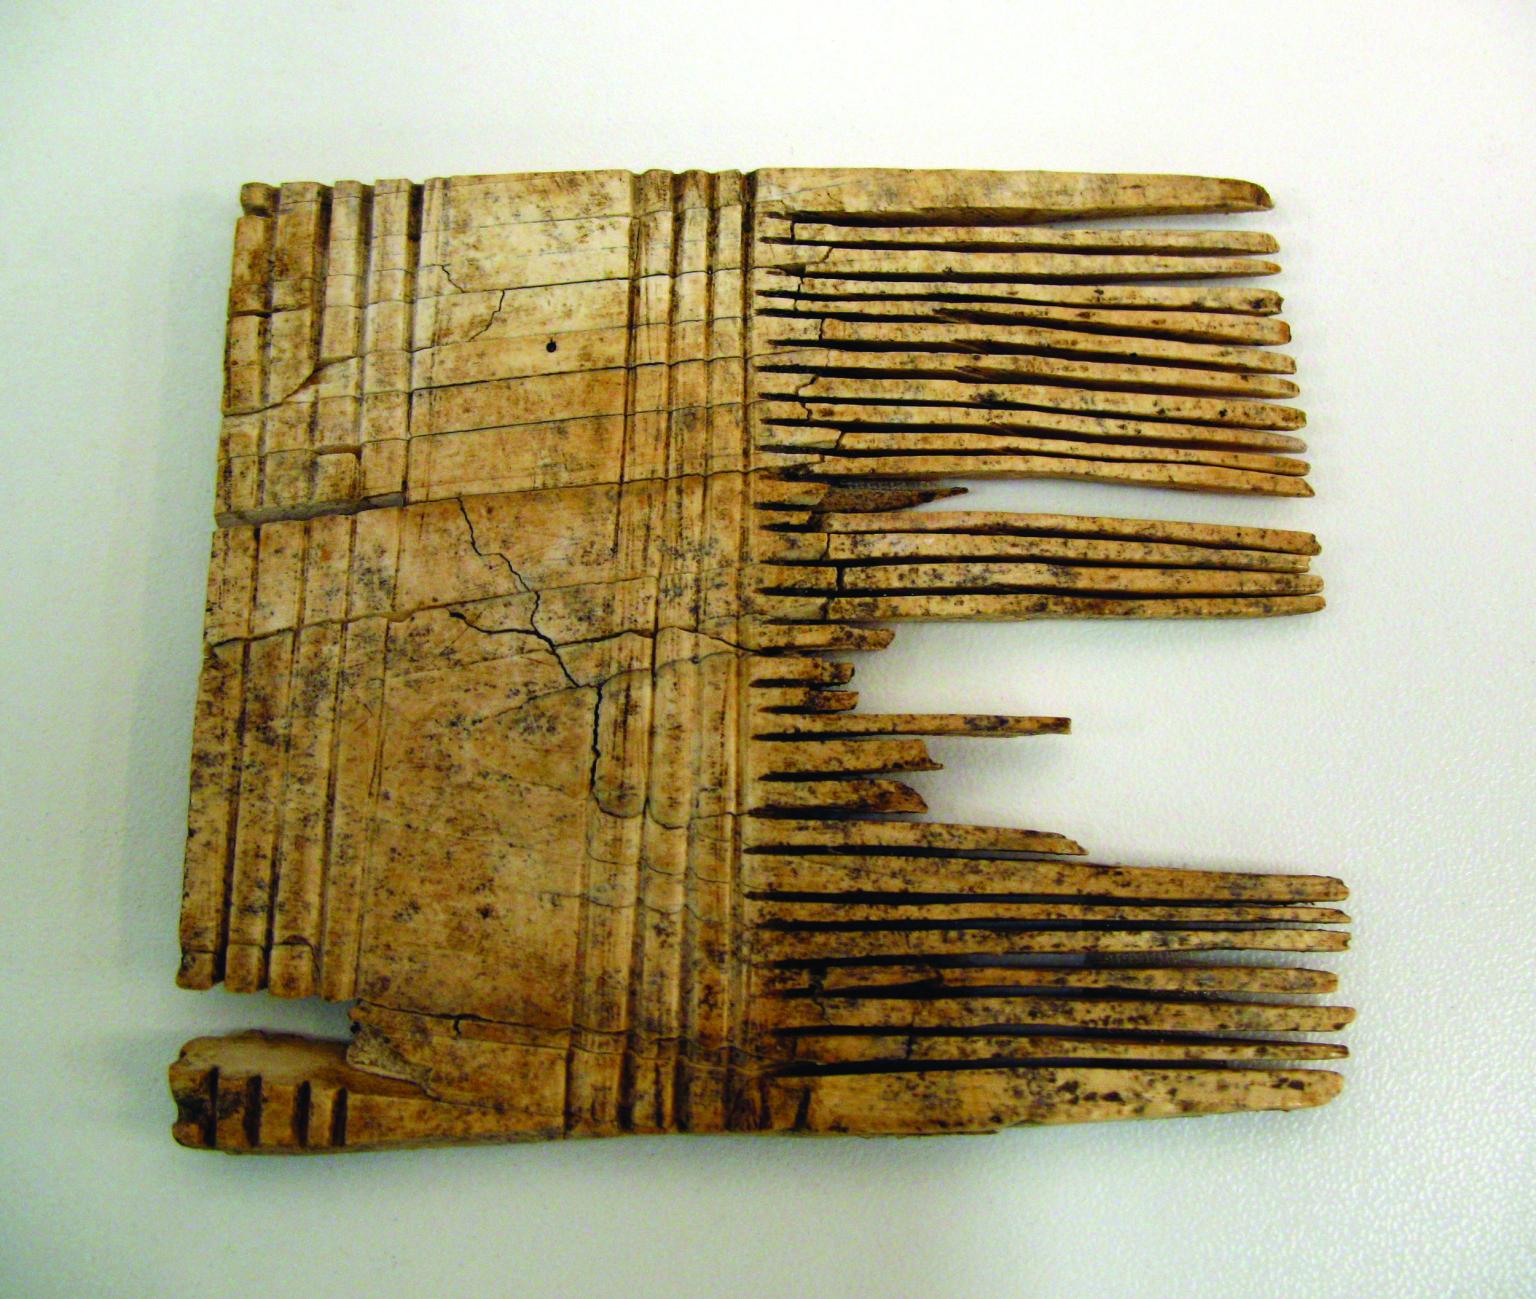 Square-shaped comb with closely-positioned teeth on the right-hand side and wide handle with carved stripes. 